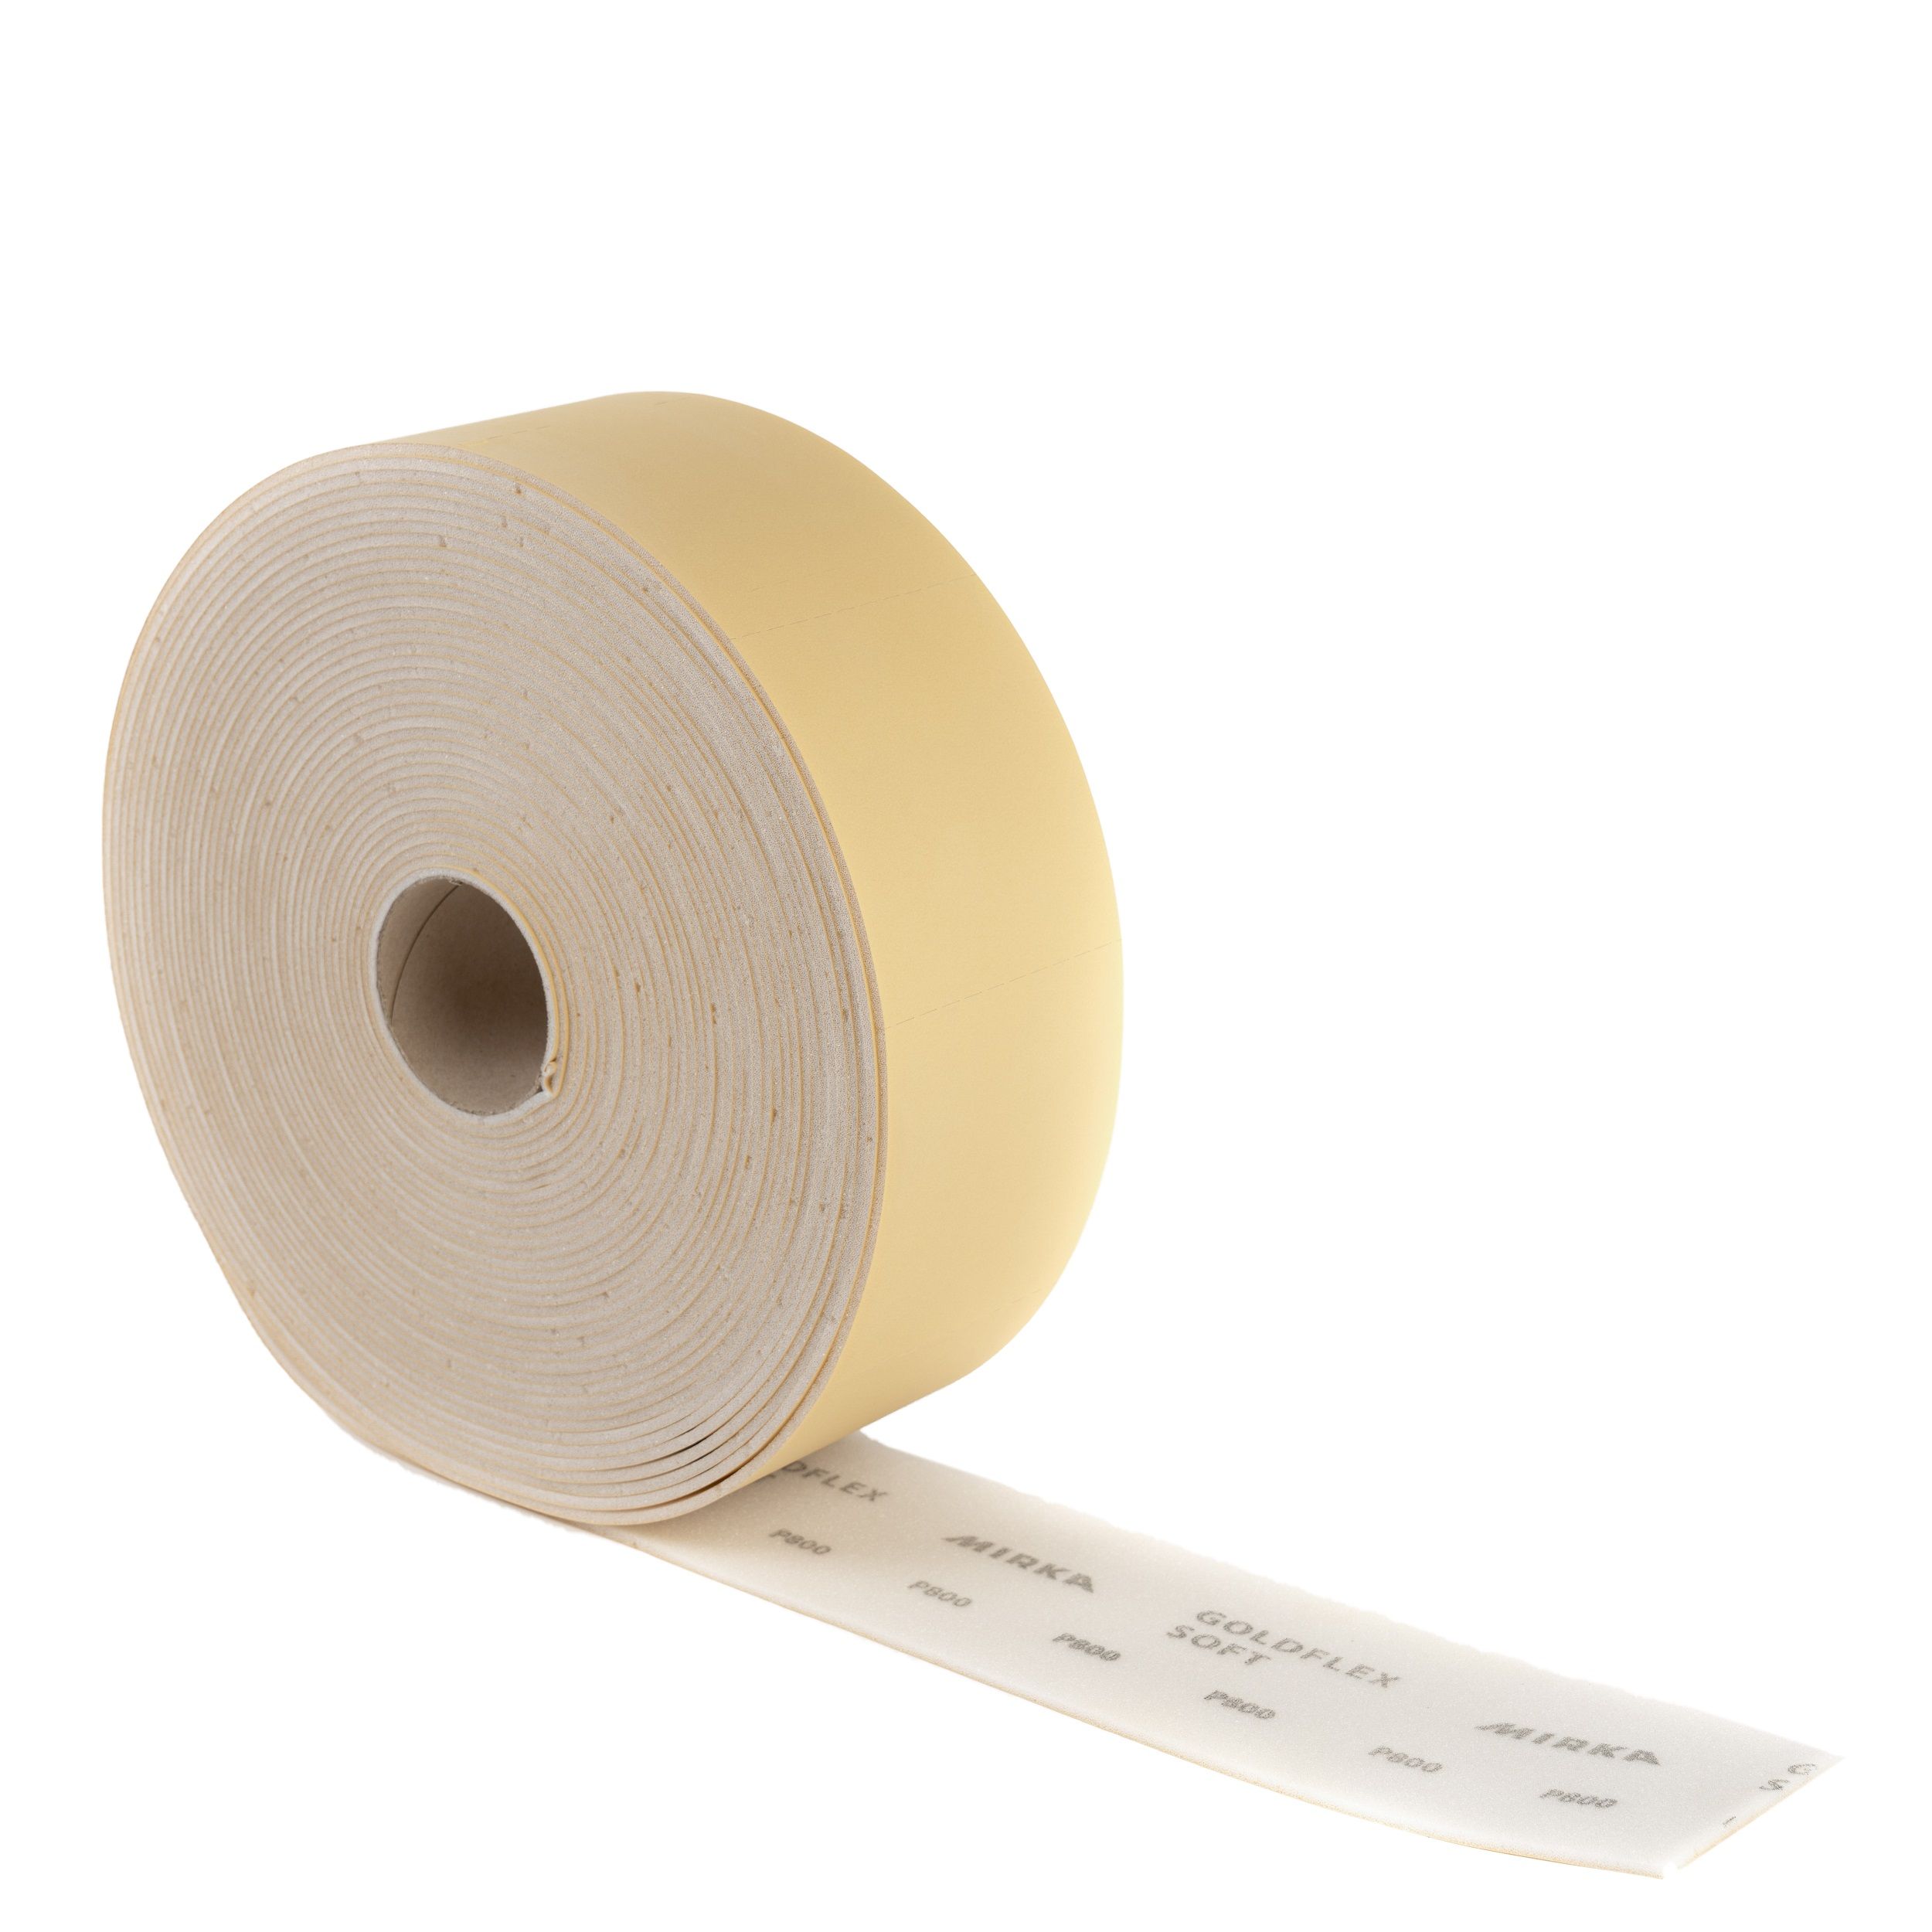 Goldflex Soft 115 x 125 mm perforated roll